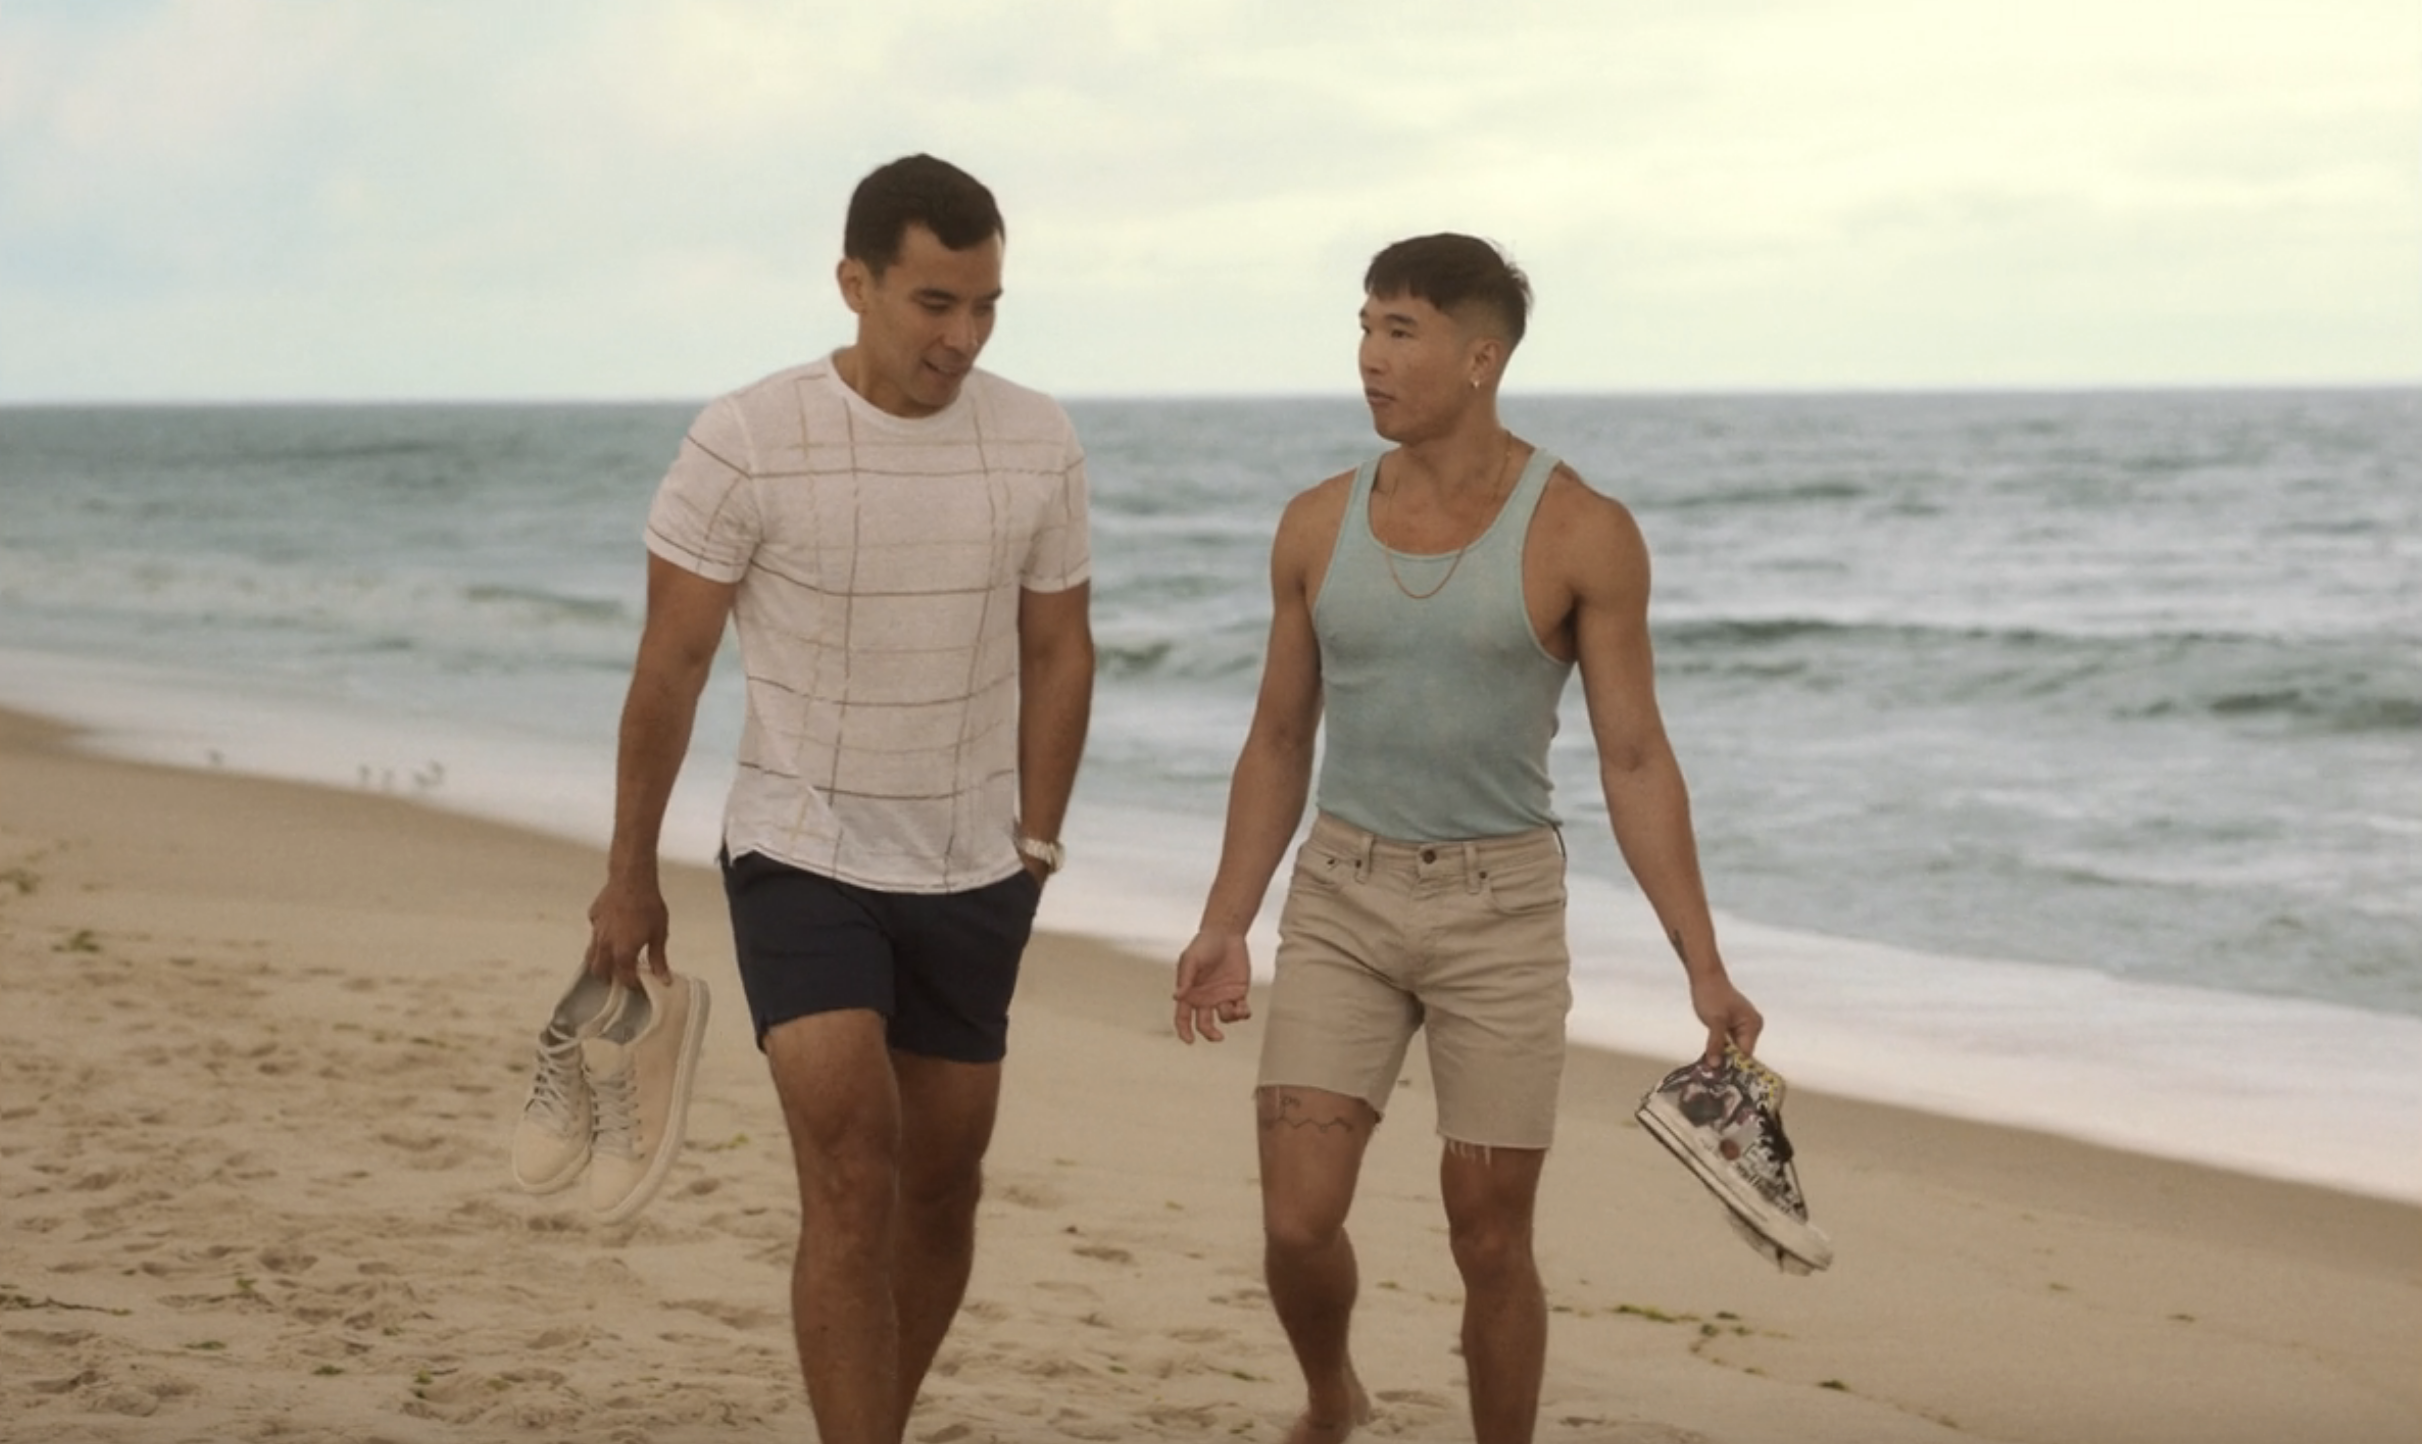 Ricamora and Booster walk along the sand on a beach holding their sneakers